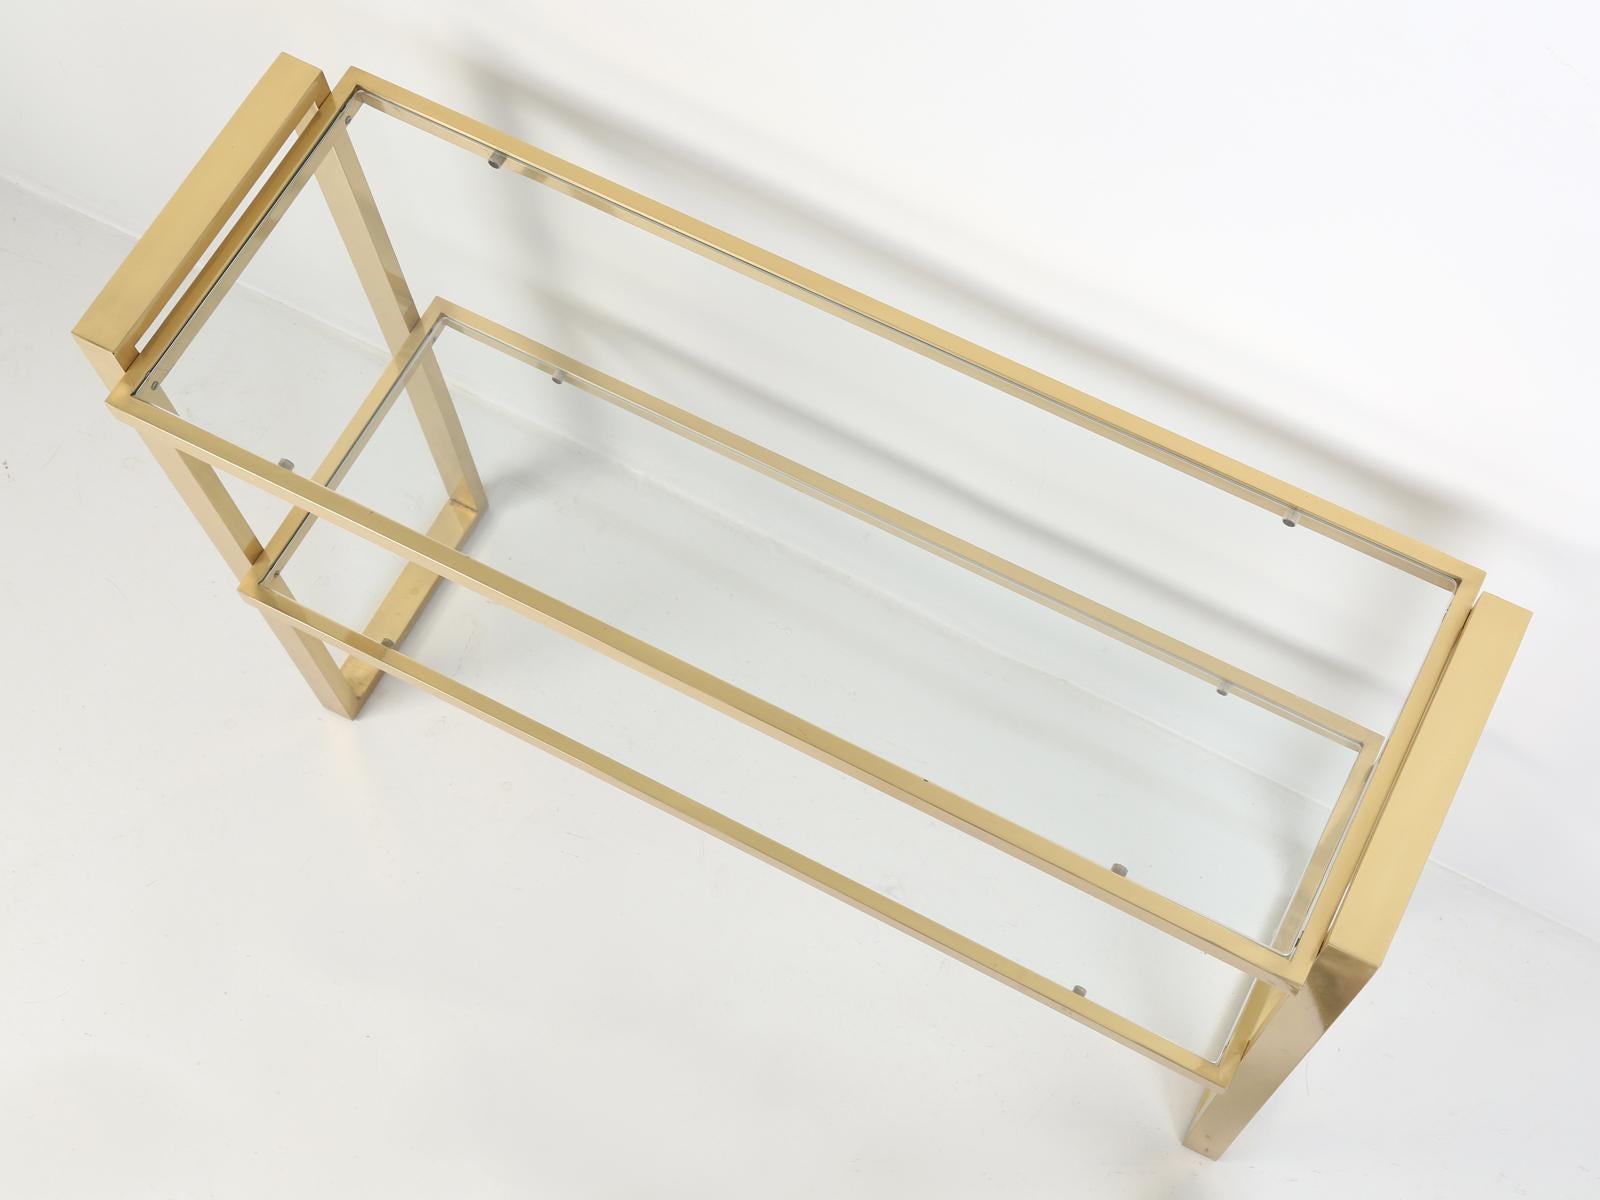 Mid-Century Modern brass and glass sofa table or console table, probably made in the 1960s or early 1970s. In as found condition with some light scuffs in the clear-coat which was applied to the brass. No visible prior repairs.
The clear coat has